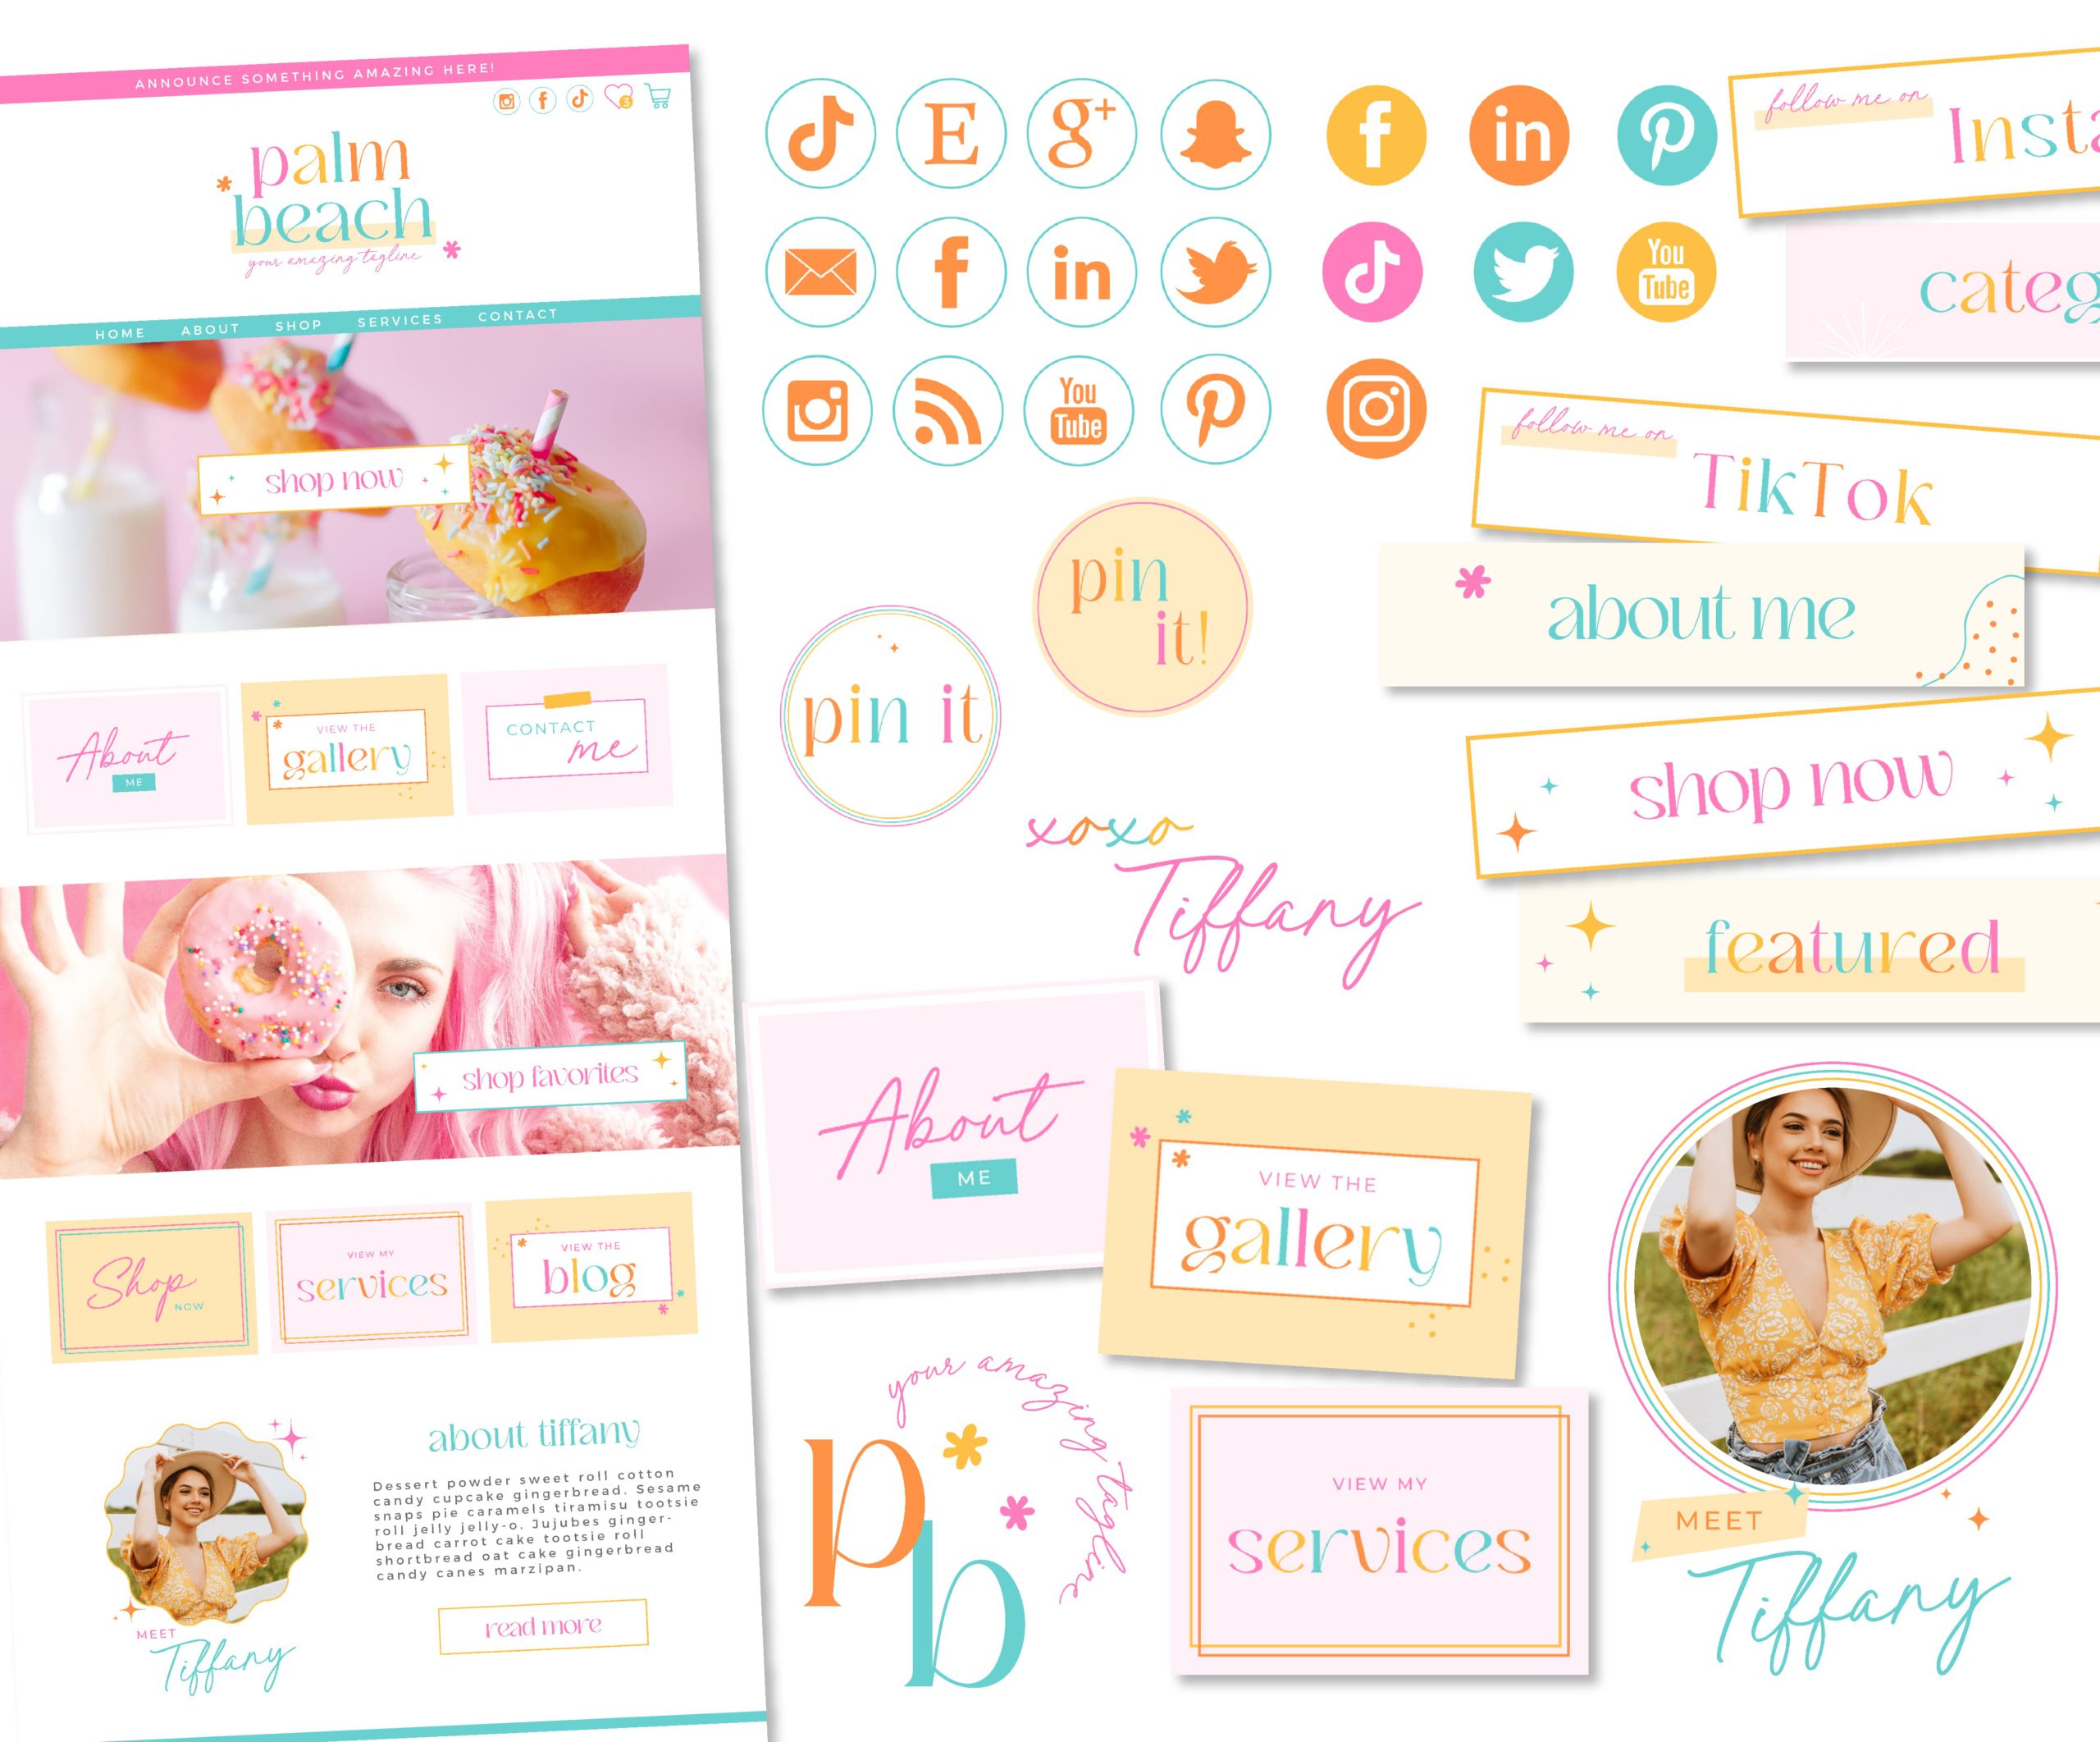 Bright Retro Ultimate Web Kit, Website Kit Template, Wordpress, Wix, Shopify also includes a blog and logo set. Colorful Boho Websites Buttons and Graphics